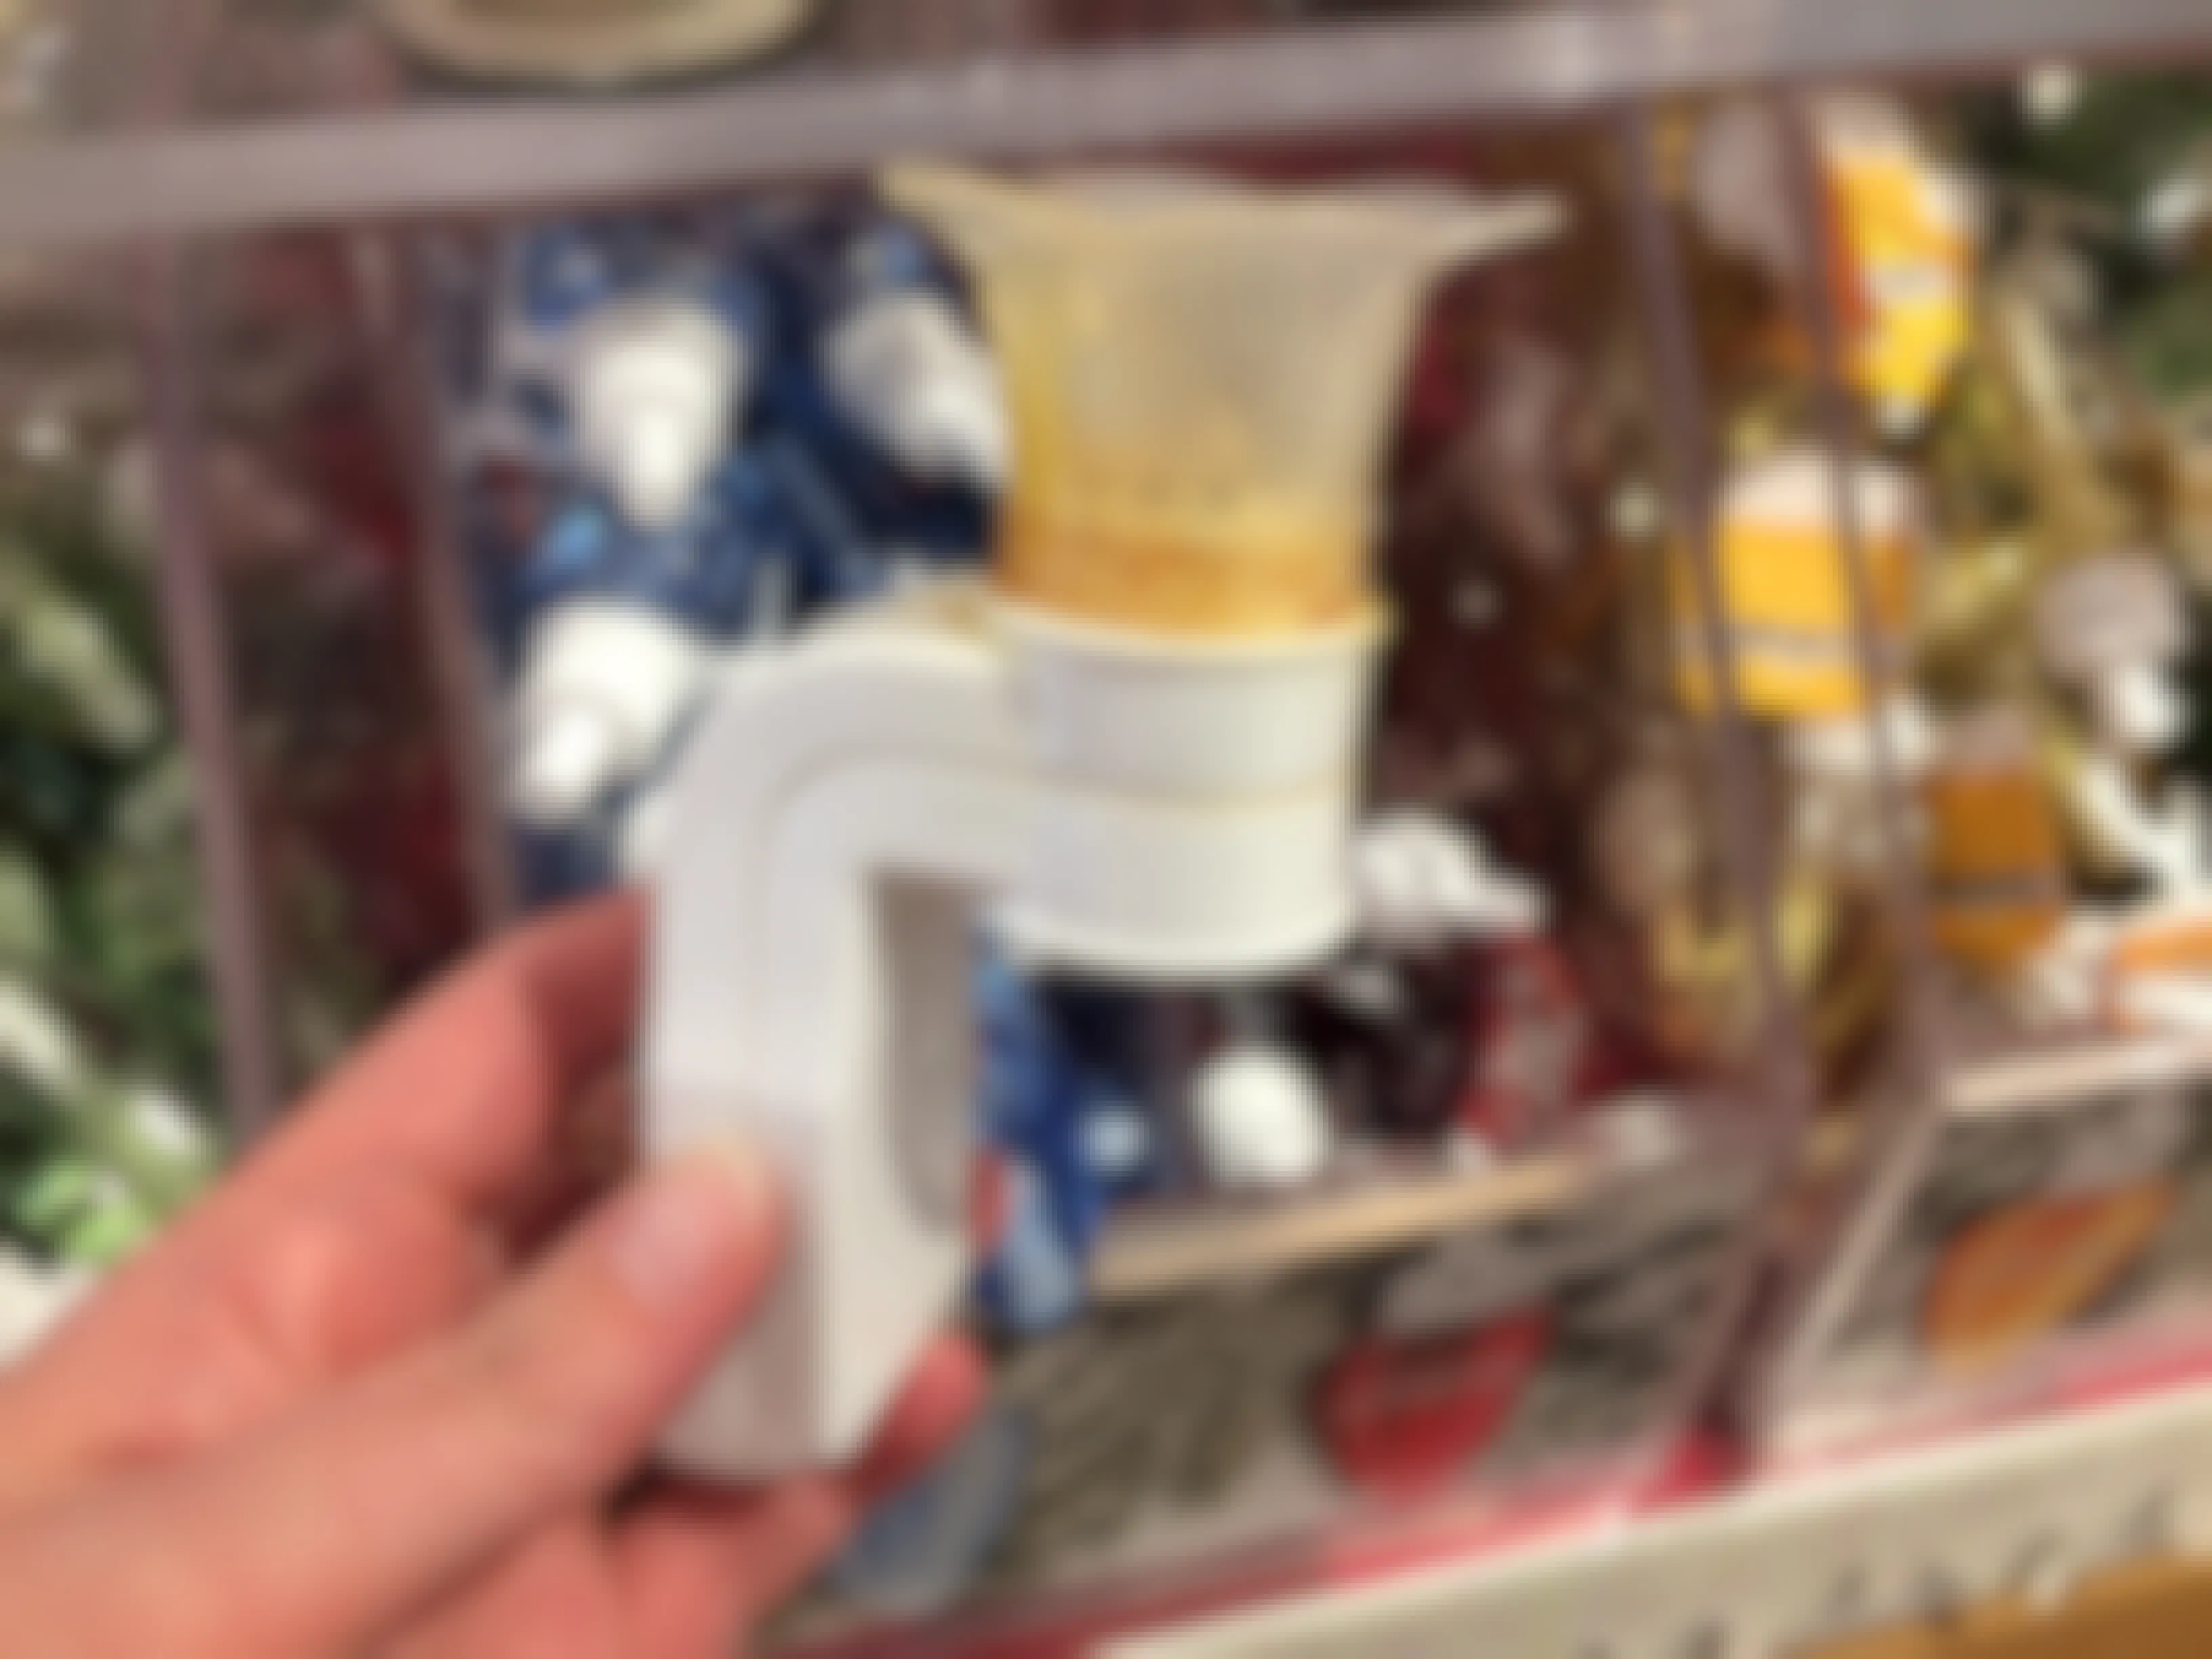 A person's hand holding a used Wallflower plugin in front of bins filled with Wallflower refills at Bath & Body Works..